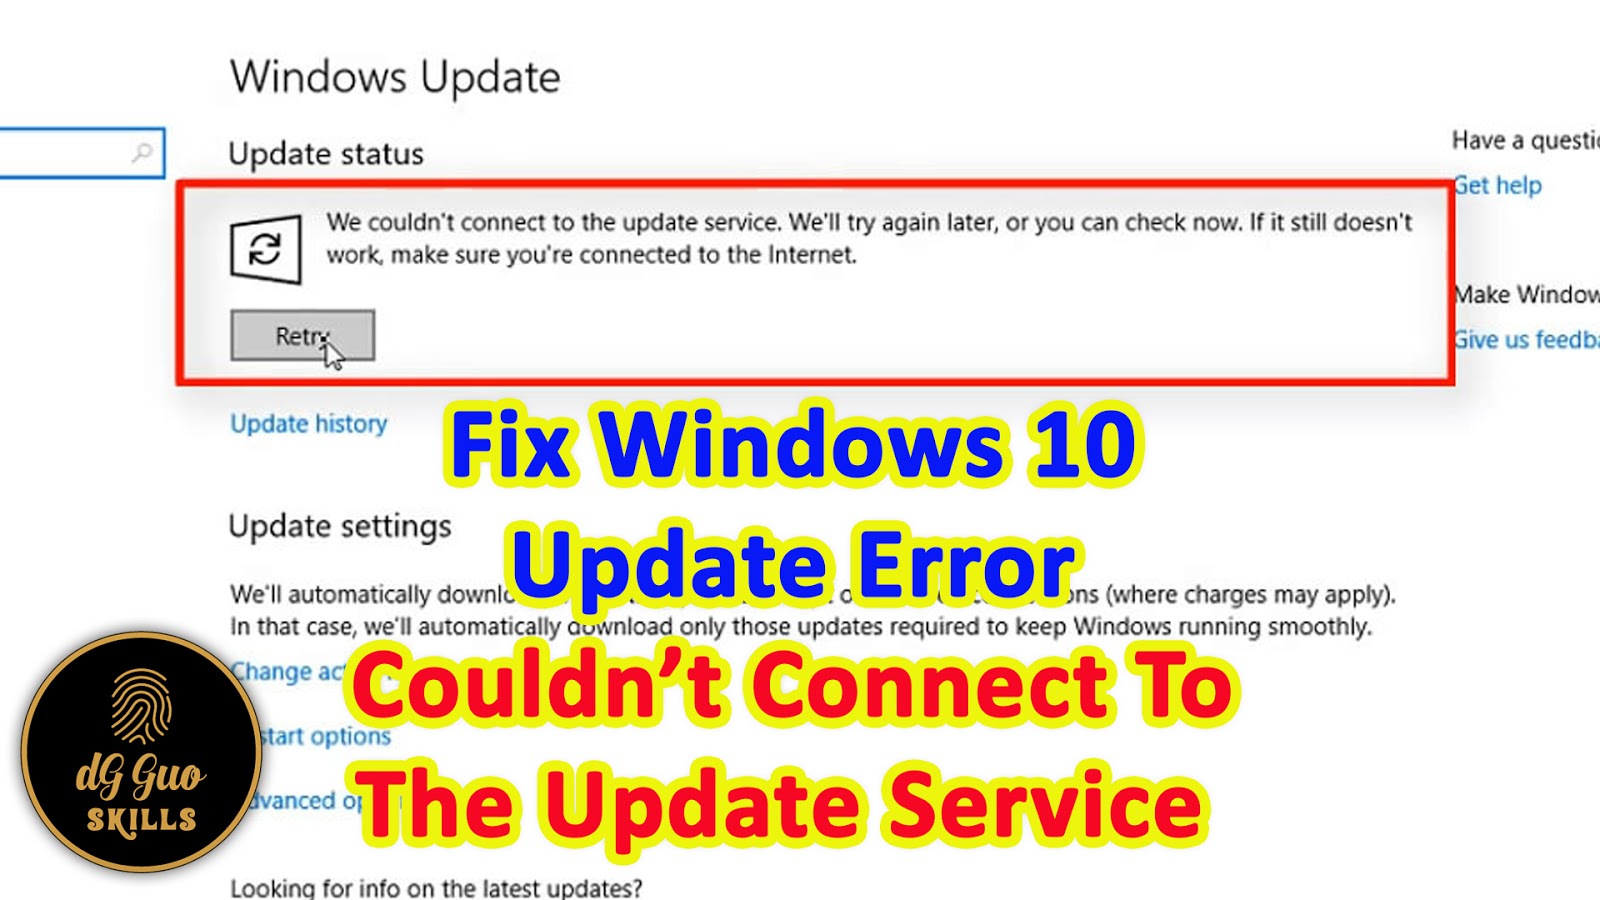 Failed to connect to a Windows service. Leonardo Updater update failed: connect.connect timed out.